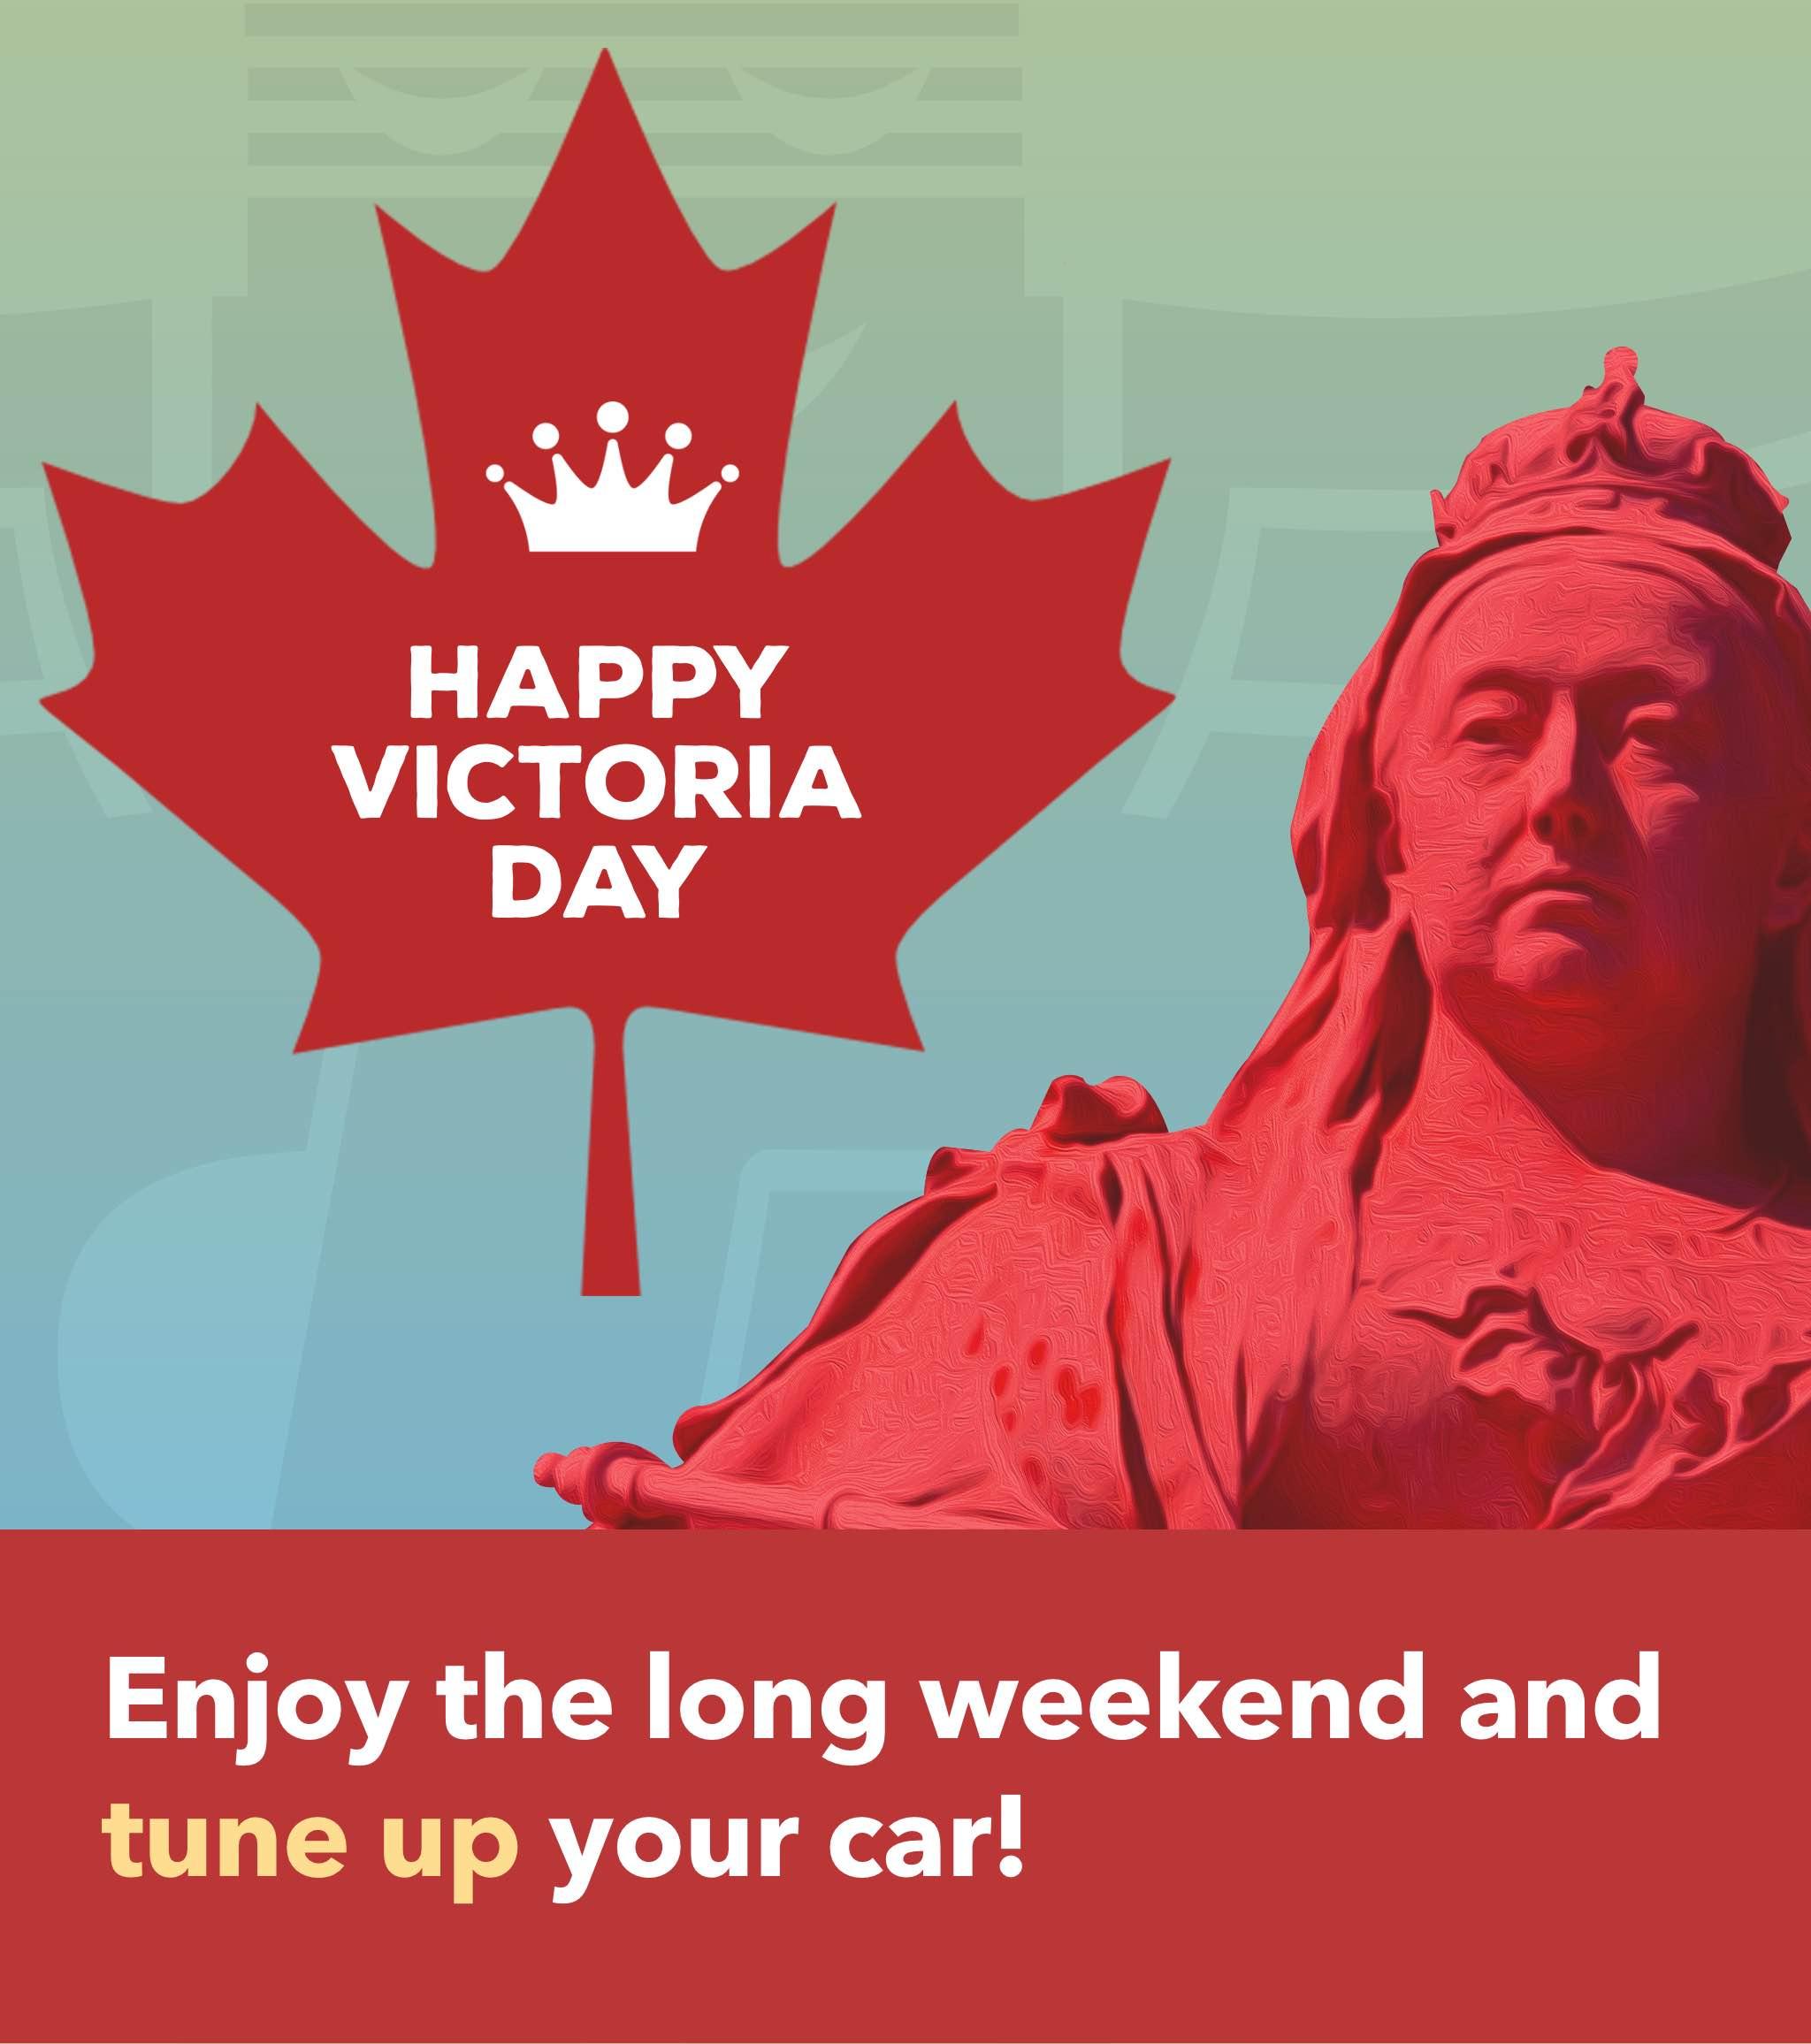 Enjoy the long weekend and tune up your vehicle's engine.